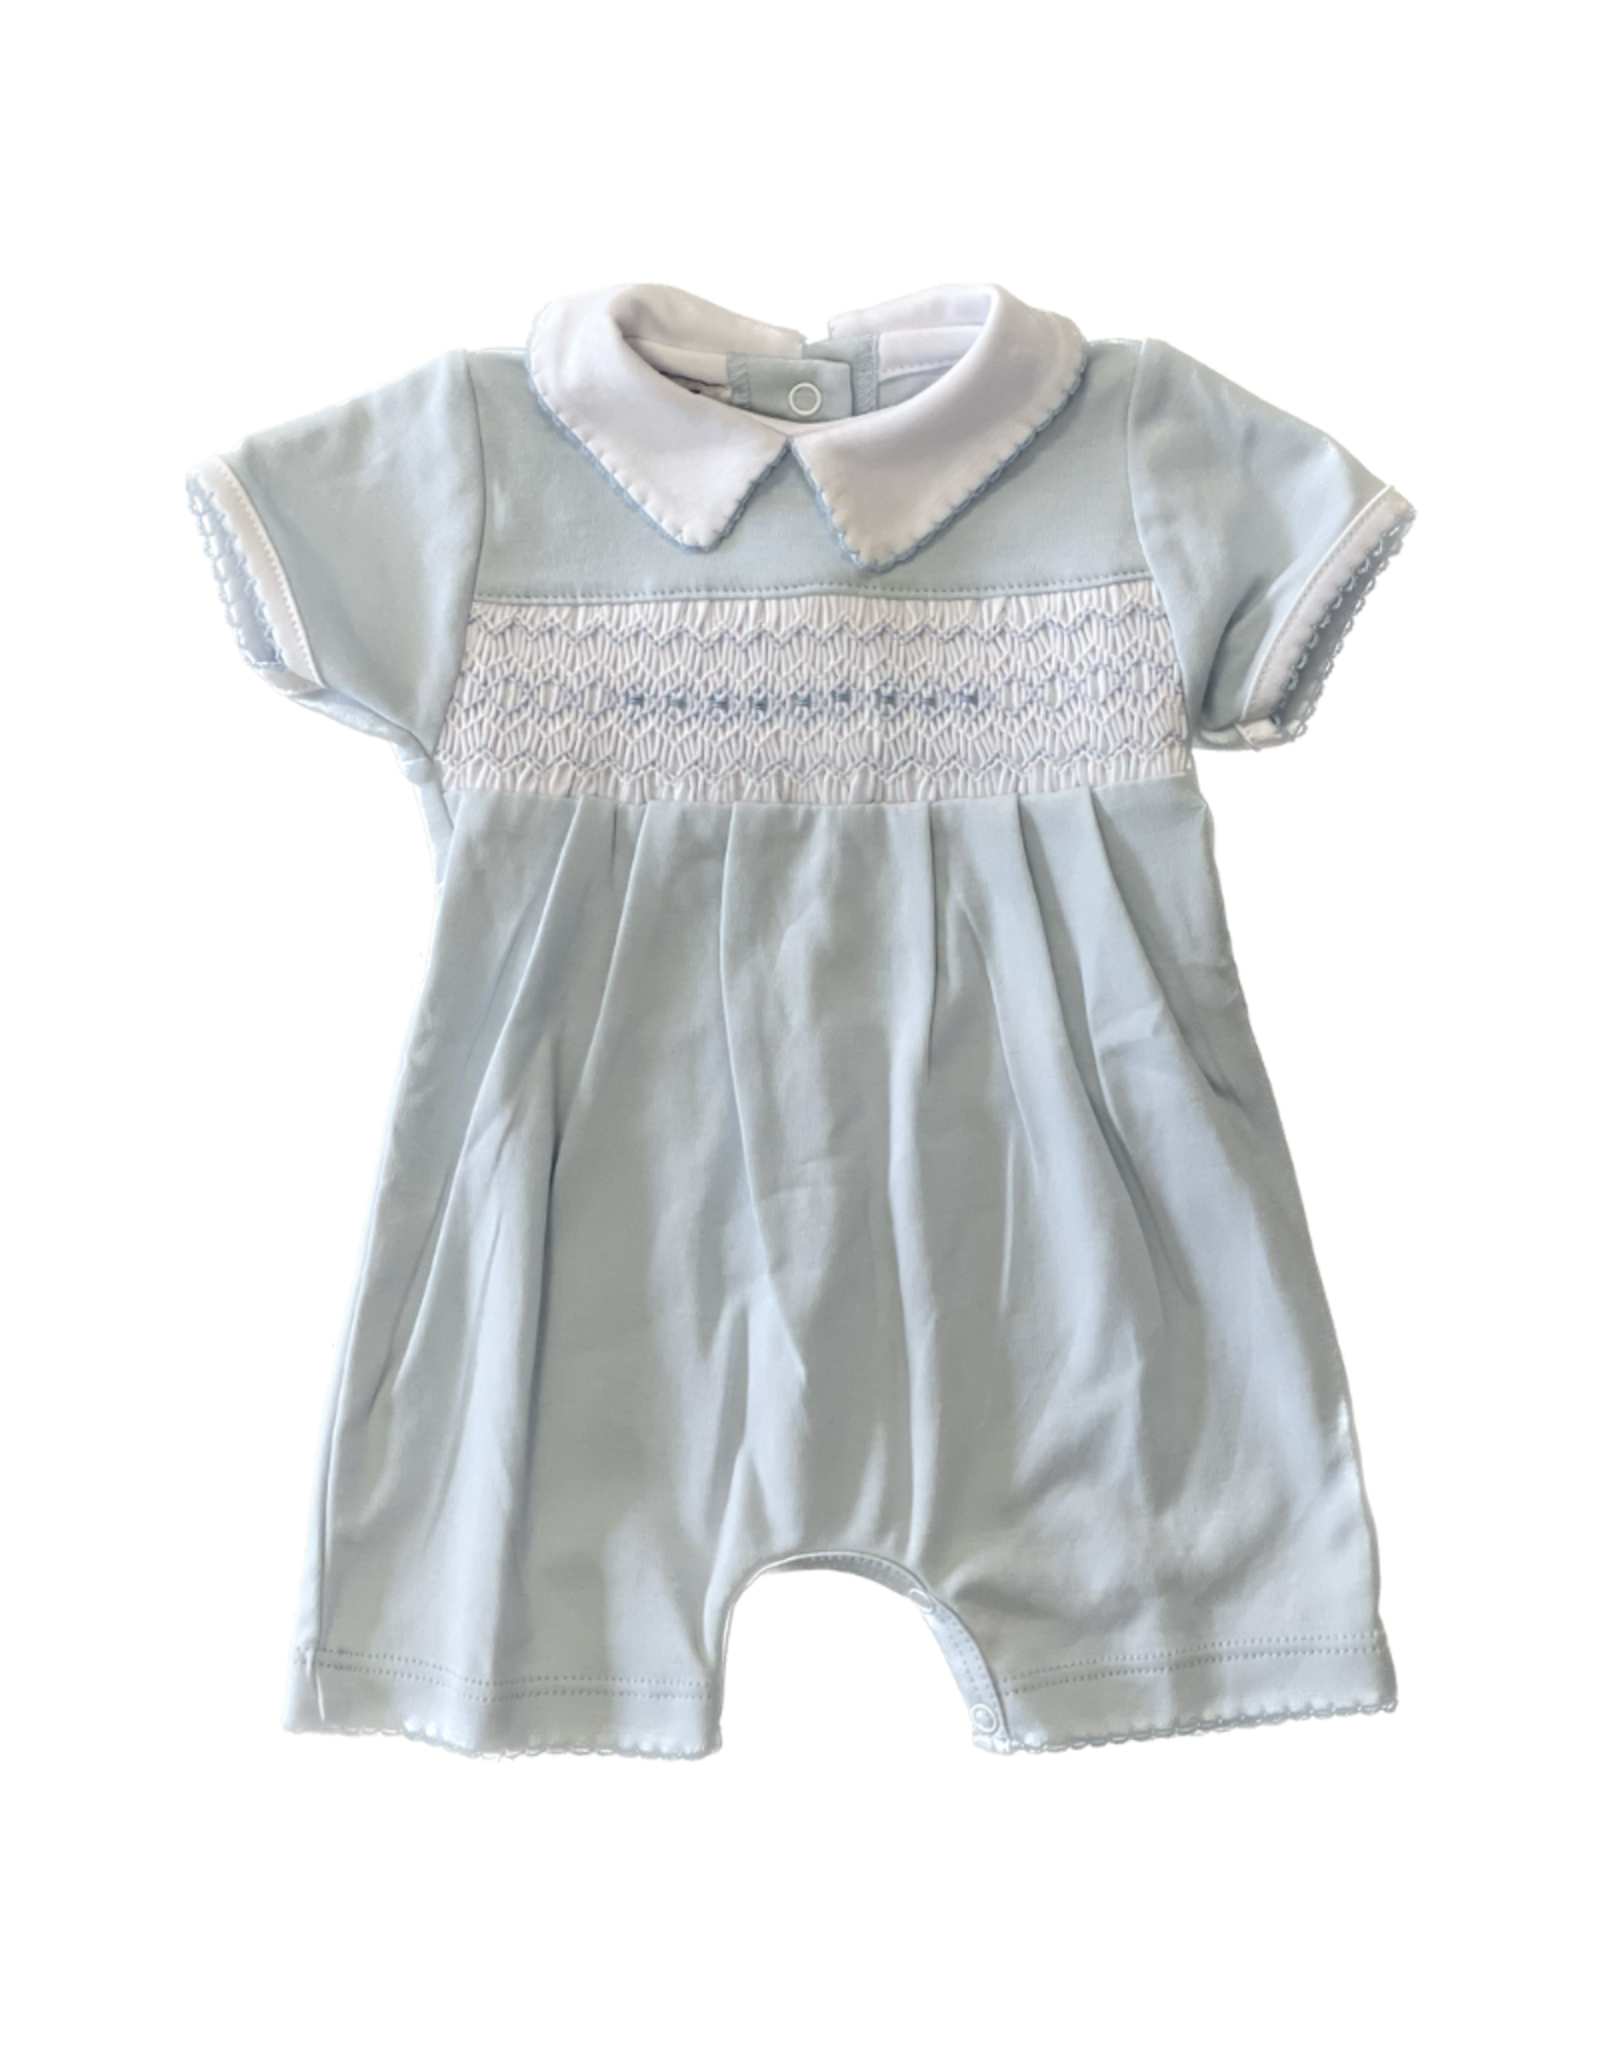 Magnolia Baby Hailey And Harry Collared Short Playsuit